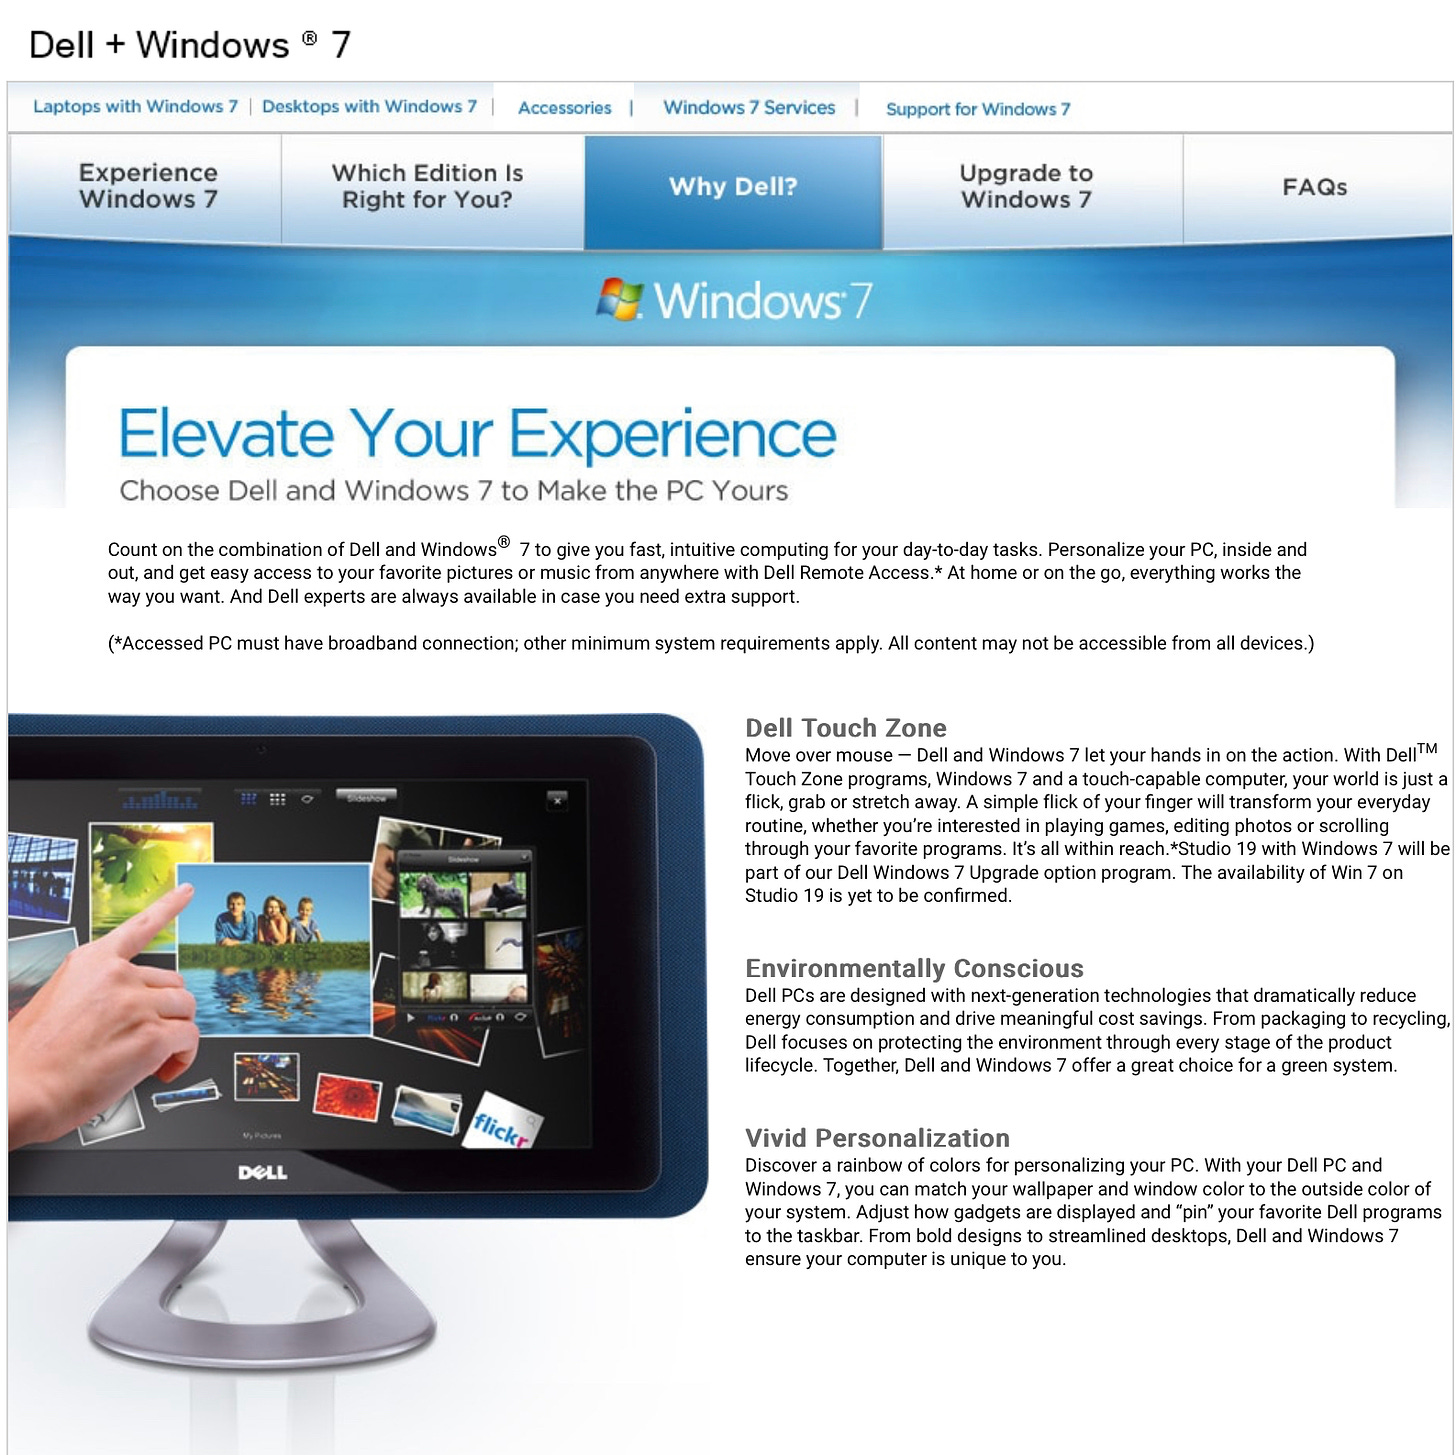 Elevate Your Experience Choose Dell and Windows 7 to Make the PC Yours Count on the combination of Dell and Windows® 7 to give you fast, intuitive computing for your day-to-day tasks. Personalize your PC, inside and out, and get easy access to your favorite pictures or music from anywhere with Dell Remote Access.* At home or on the go, everything works the way you want. And Dell experts are always available in case you need extra support. (*Accessed PC must have broadband connection; other minimum system requirements apply. All content may not be accessible from all devices.) Dell Touch Zone Move over mouse - Dell and Windows 7 let vour hands in on the action. With Dell™M Touch Zone programs, Windows 7 and a touch-capable computer, your world is just a flick, grab or stretch away. A simple flick of your finger will transform your everyday routine, whether you're interested in playing games, editing photos or scrolling through your favorite programs. It's all within reach.*Studio 19 with Windows 7 will be part of our Dell Windows 7 Upgrade option program. The availability of Win 7 on Studio 19 is yet to be confirmed Environmentally Conscious Dell PCs are designed with next-generation technologies that dramatically reduce energy consumption and drive meaningful cost savings. From packaging to recycling, Dell focuses on protecting the environment through every stage of the product lifecycle. Together, Dell and Windows 7 offer a great choice for a green system. flicks DOLL Vivid Personalization Discover a rainbow of colors for personalizing your PC. With your Dell PC and Windows 7, you can match your wallpaper and window color to the outside color of your system. Adjust how gadgets are displayed and "pin" your favorite Dell programs to the taskbar. From bold designs to streamlined desktops, Dell and Windows 7 ensure your computer is unique to you.